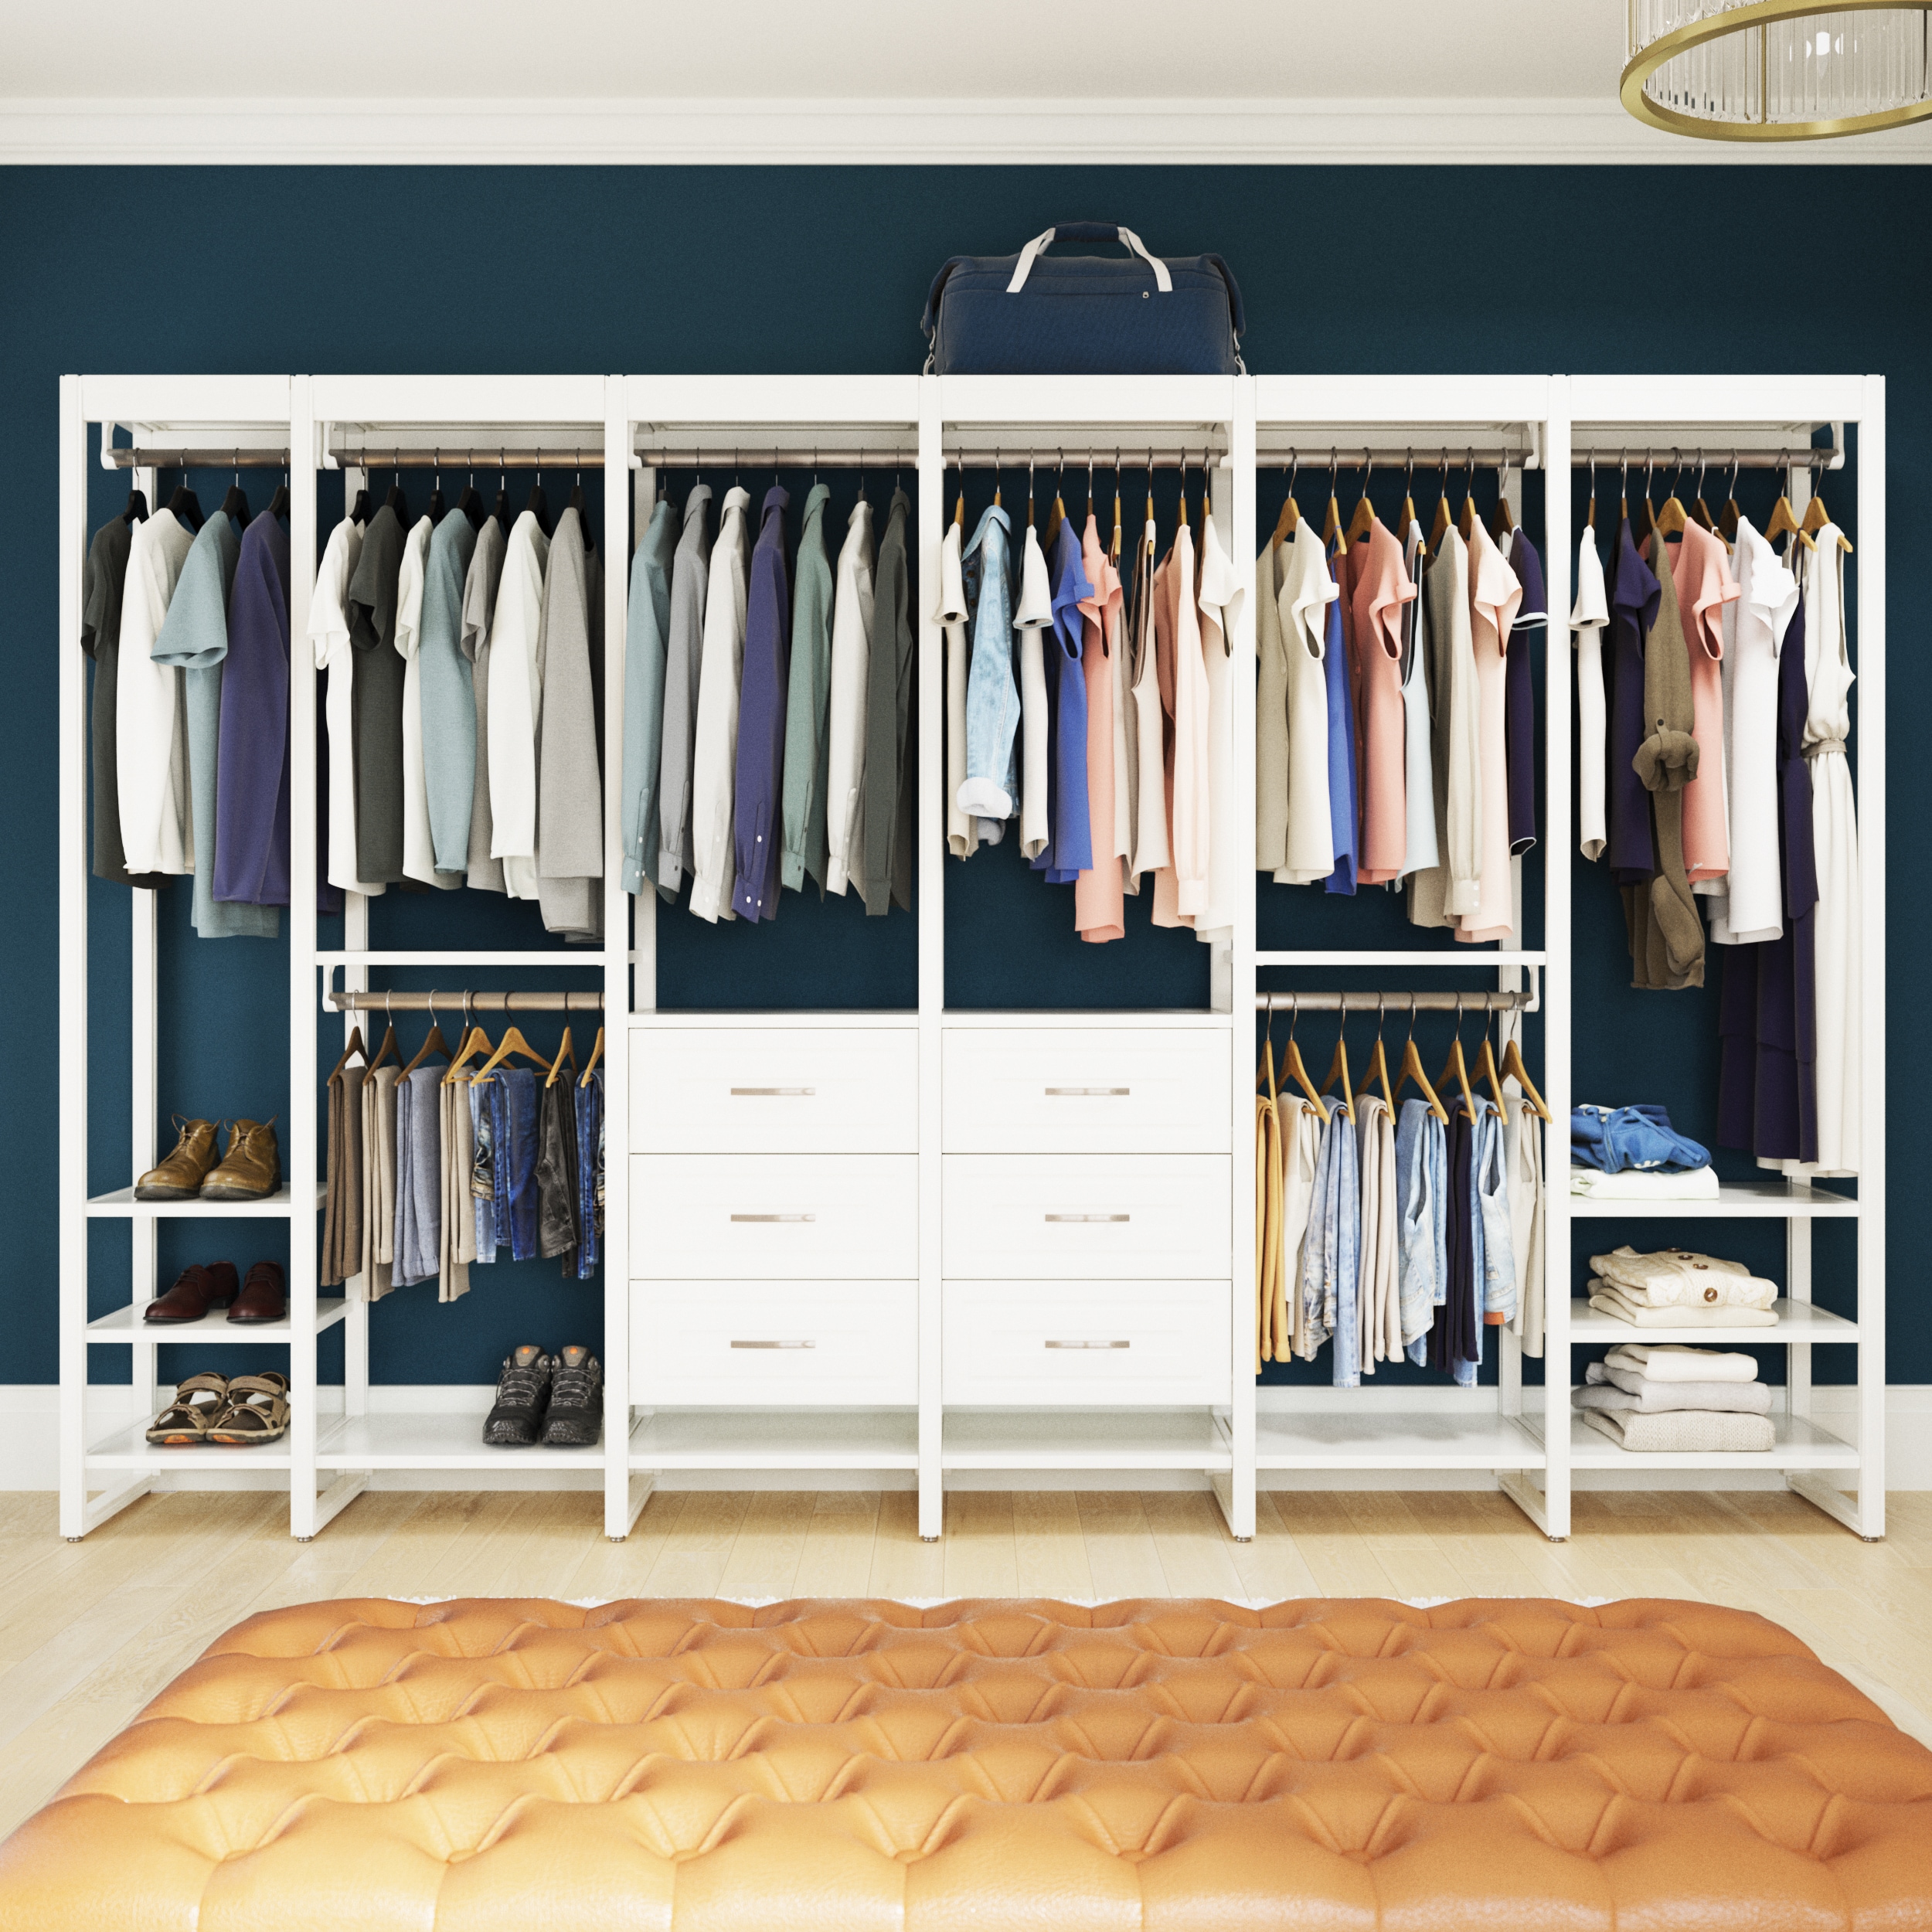 10+ Best Closet Systems - Places to Buy Closet Systems in 2020